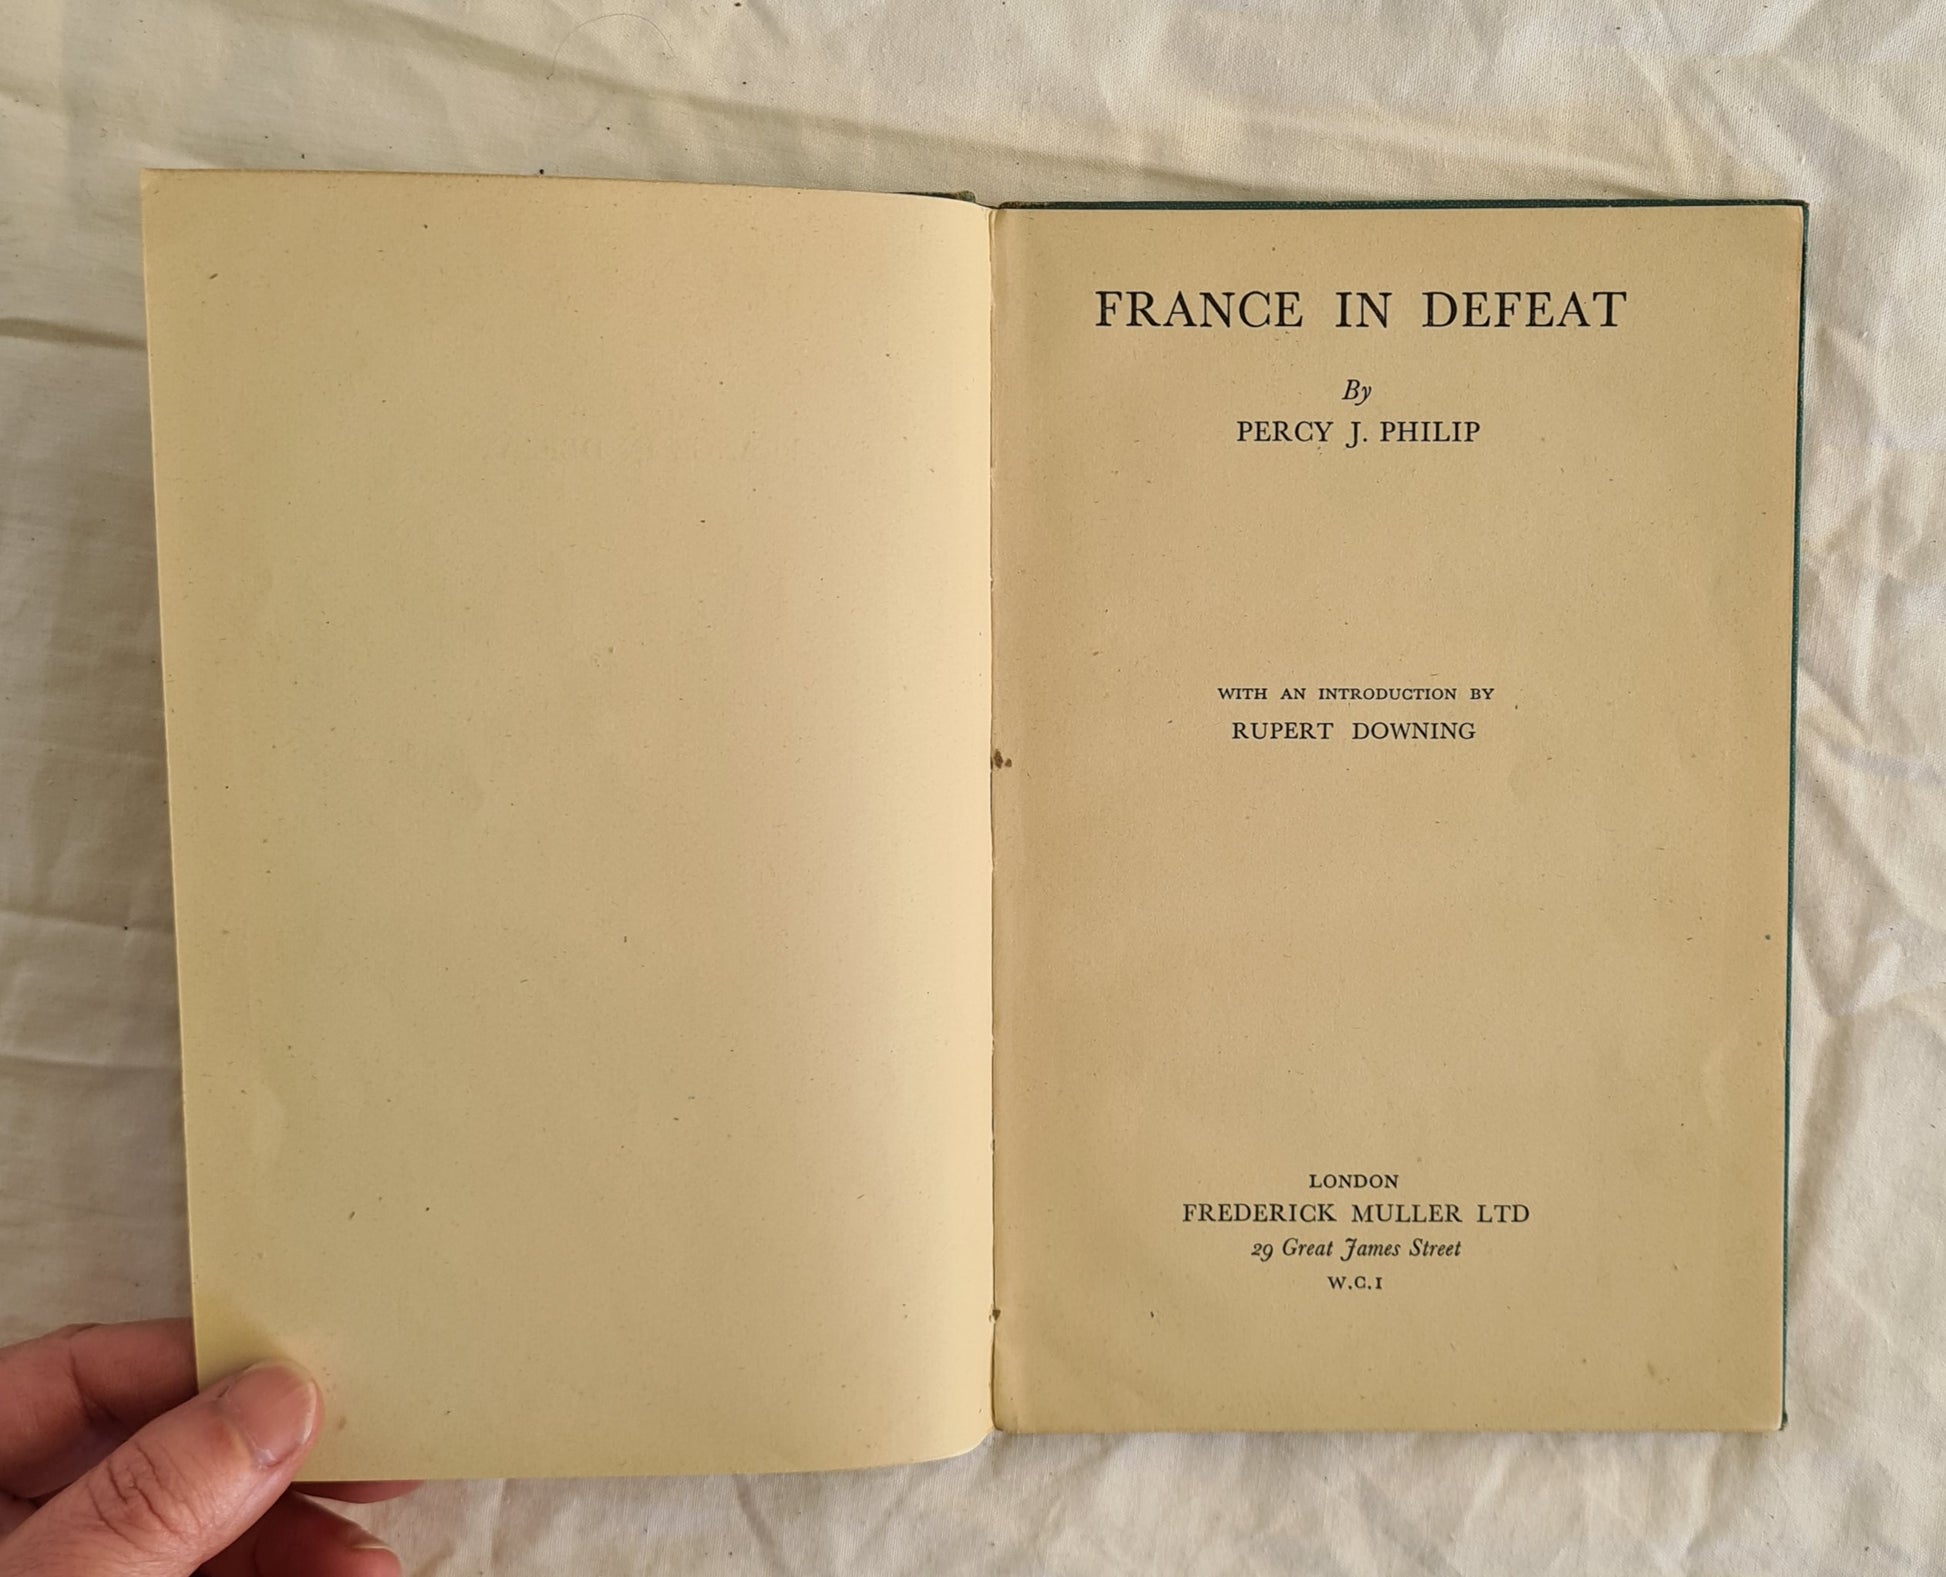 France in Defeat by Percy J. Philip